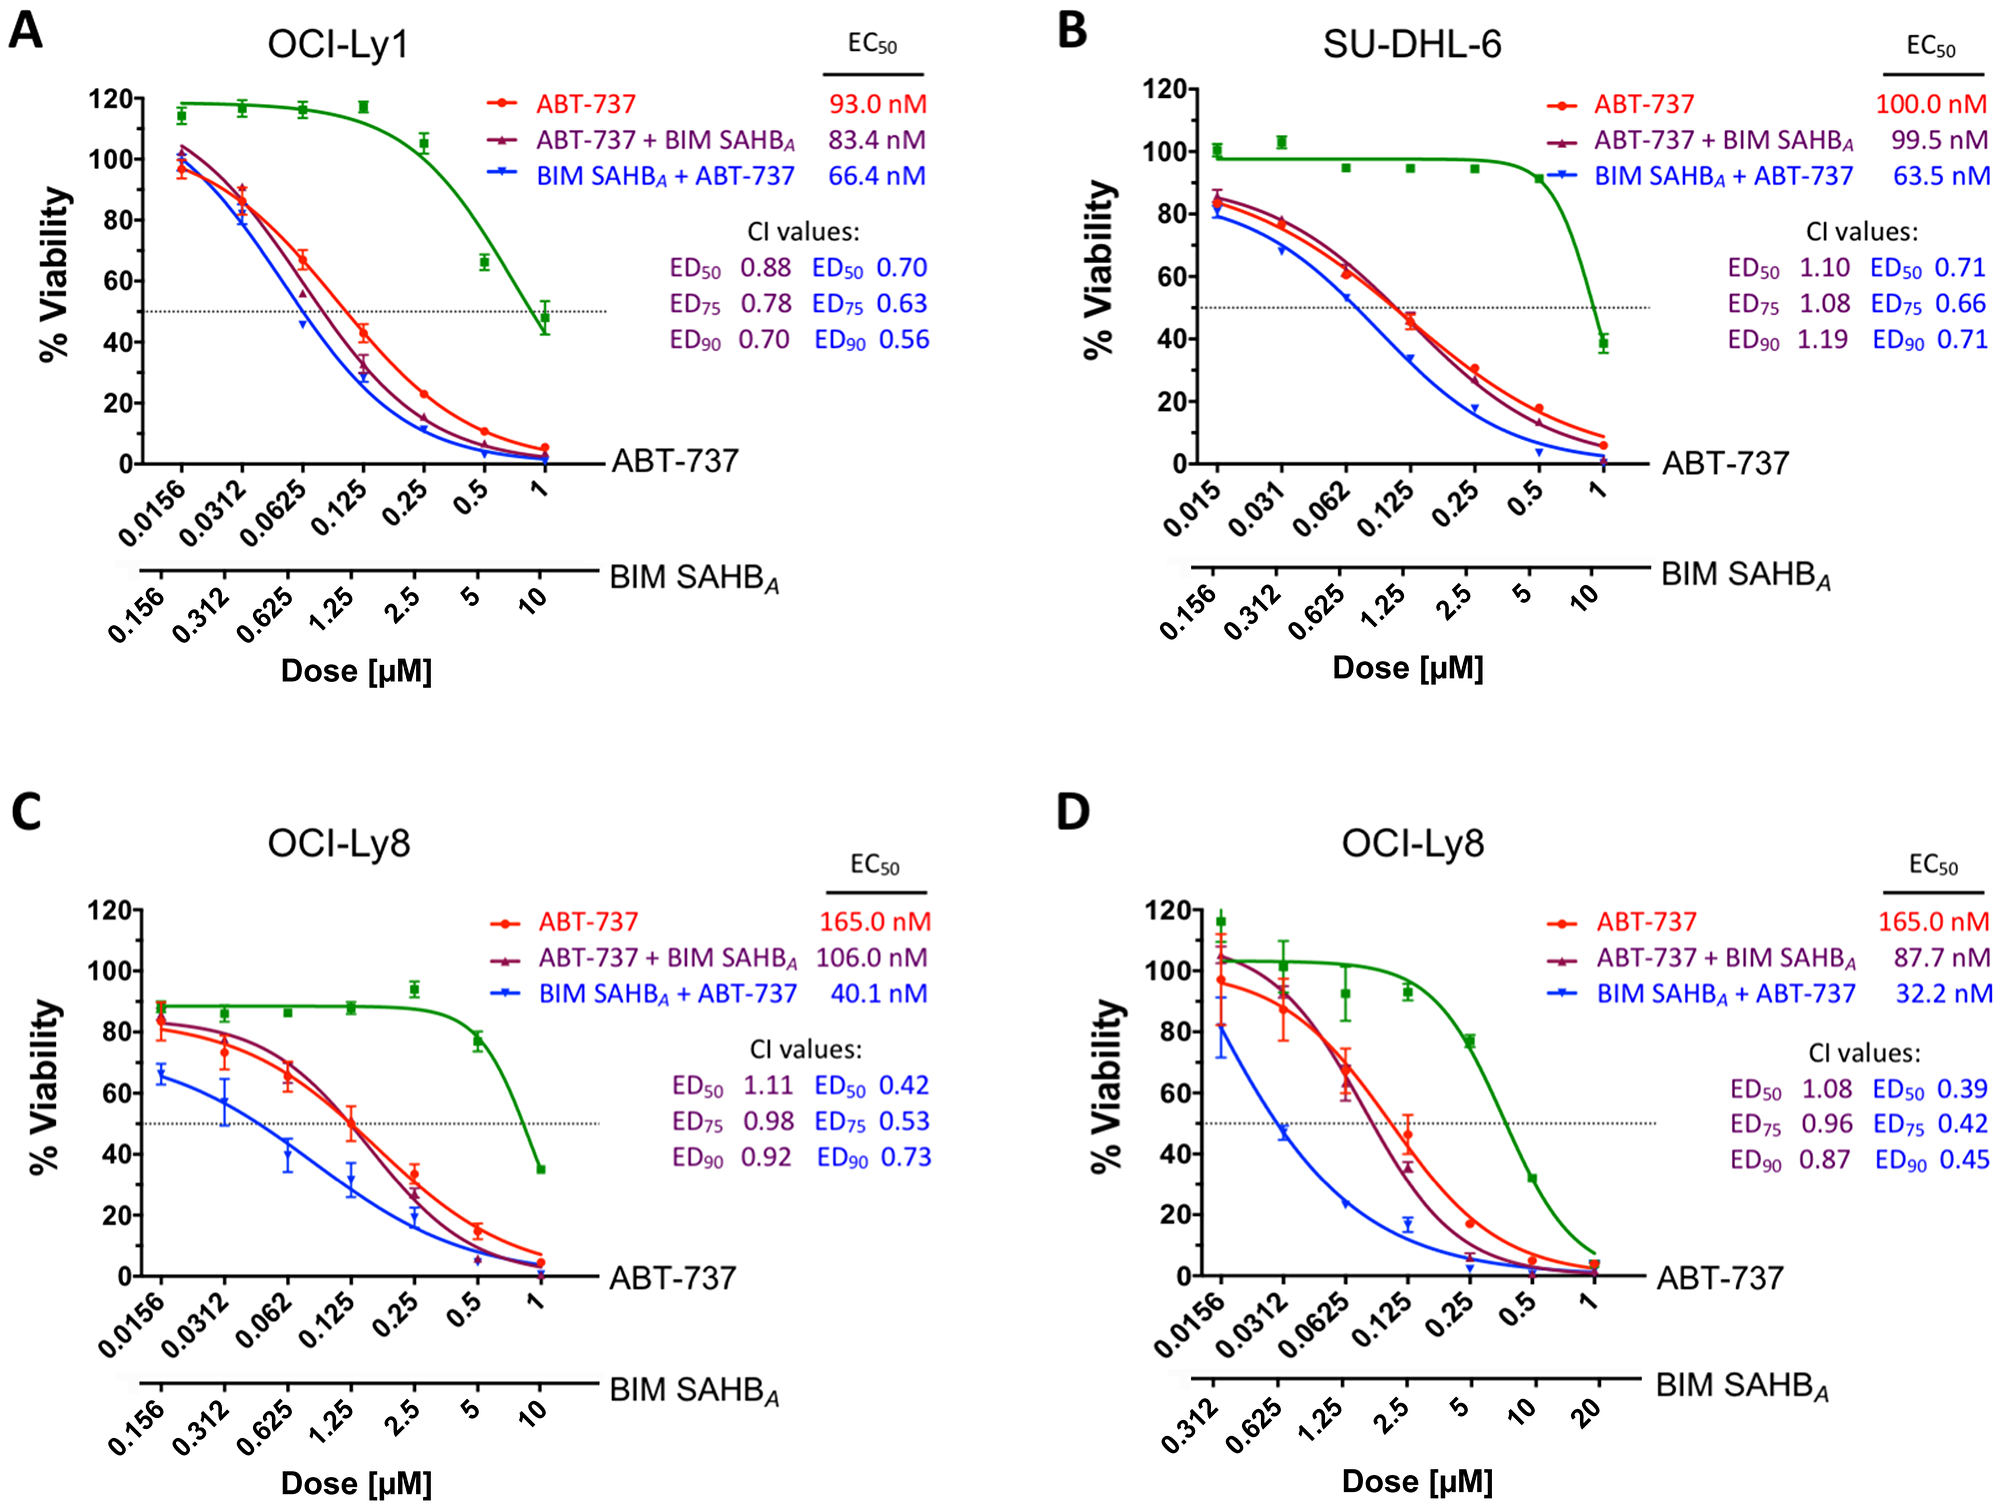 Treatment with BIM SAHBA increases DLBCL cell death when given before but not following treatment with ABT-737.